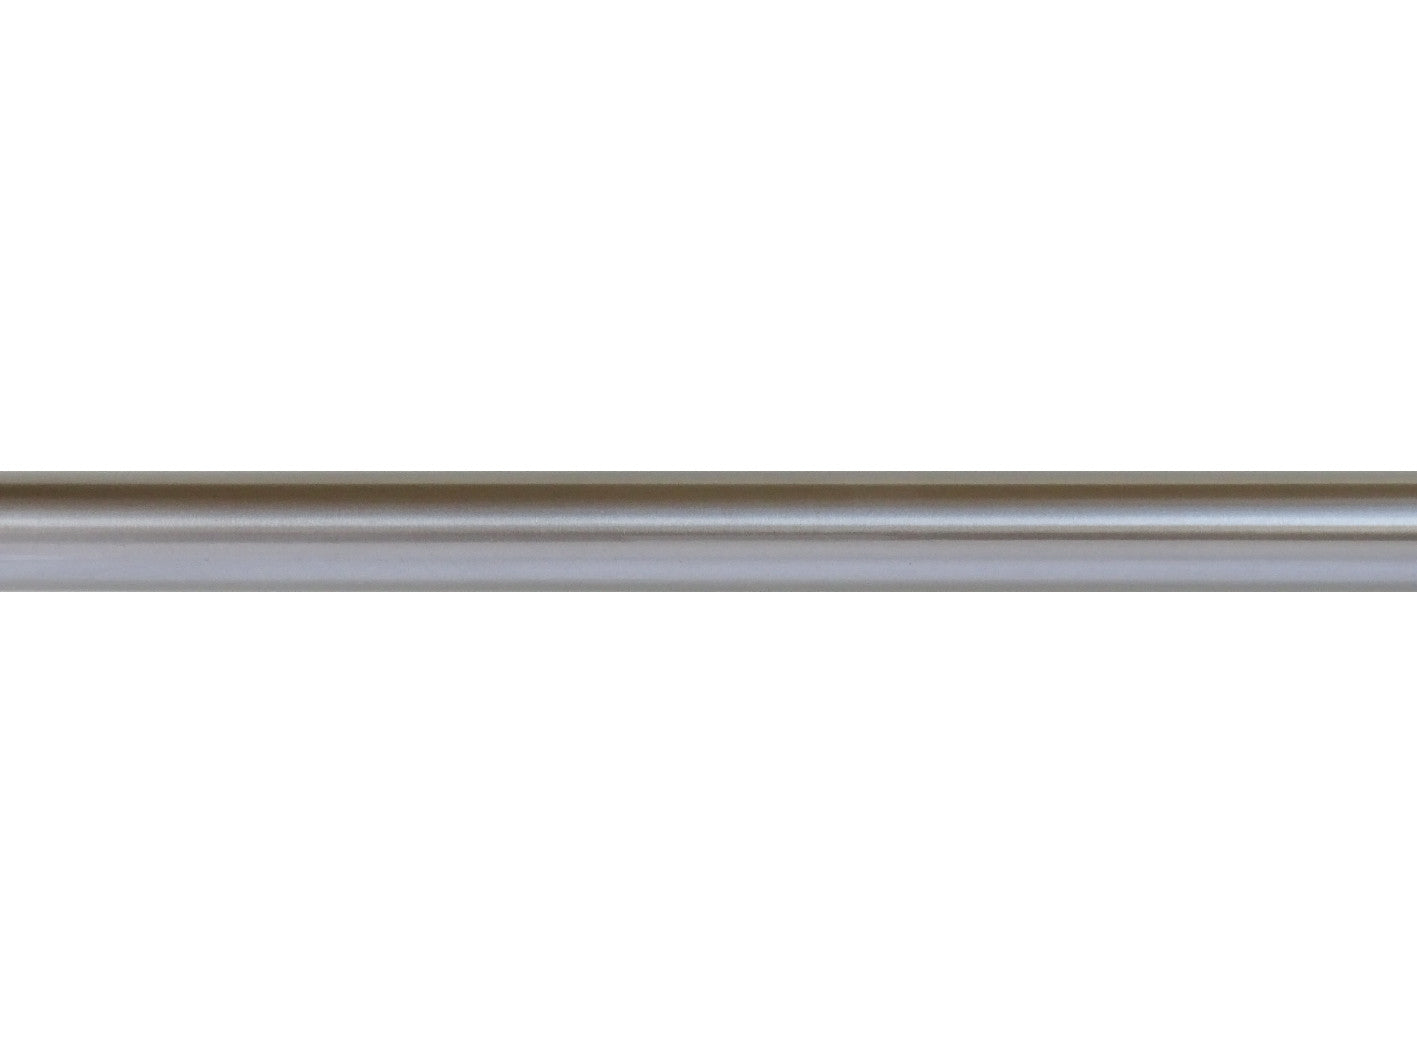 Beautiful stainless steel curtain poles by Walcot House